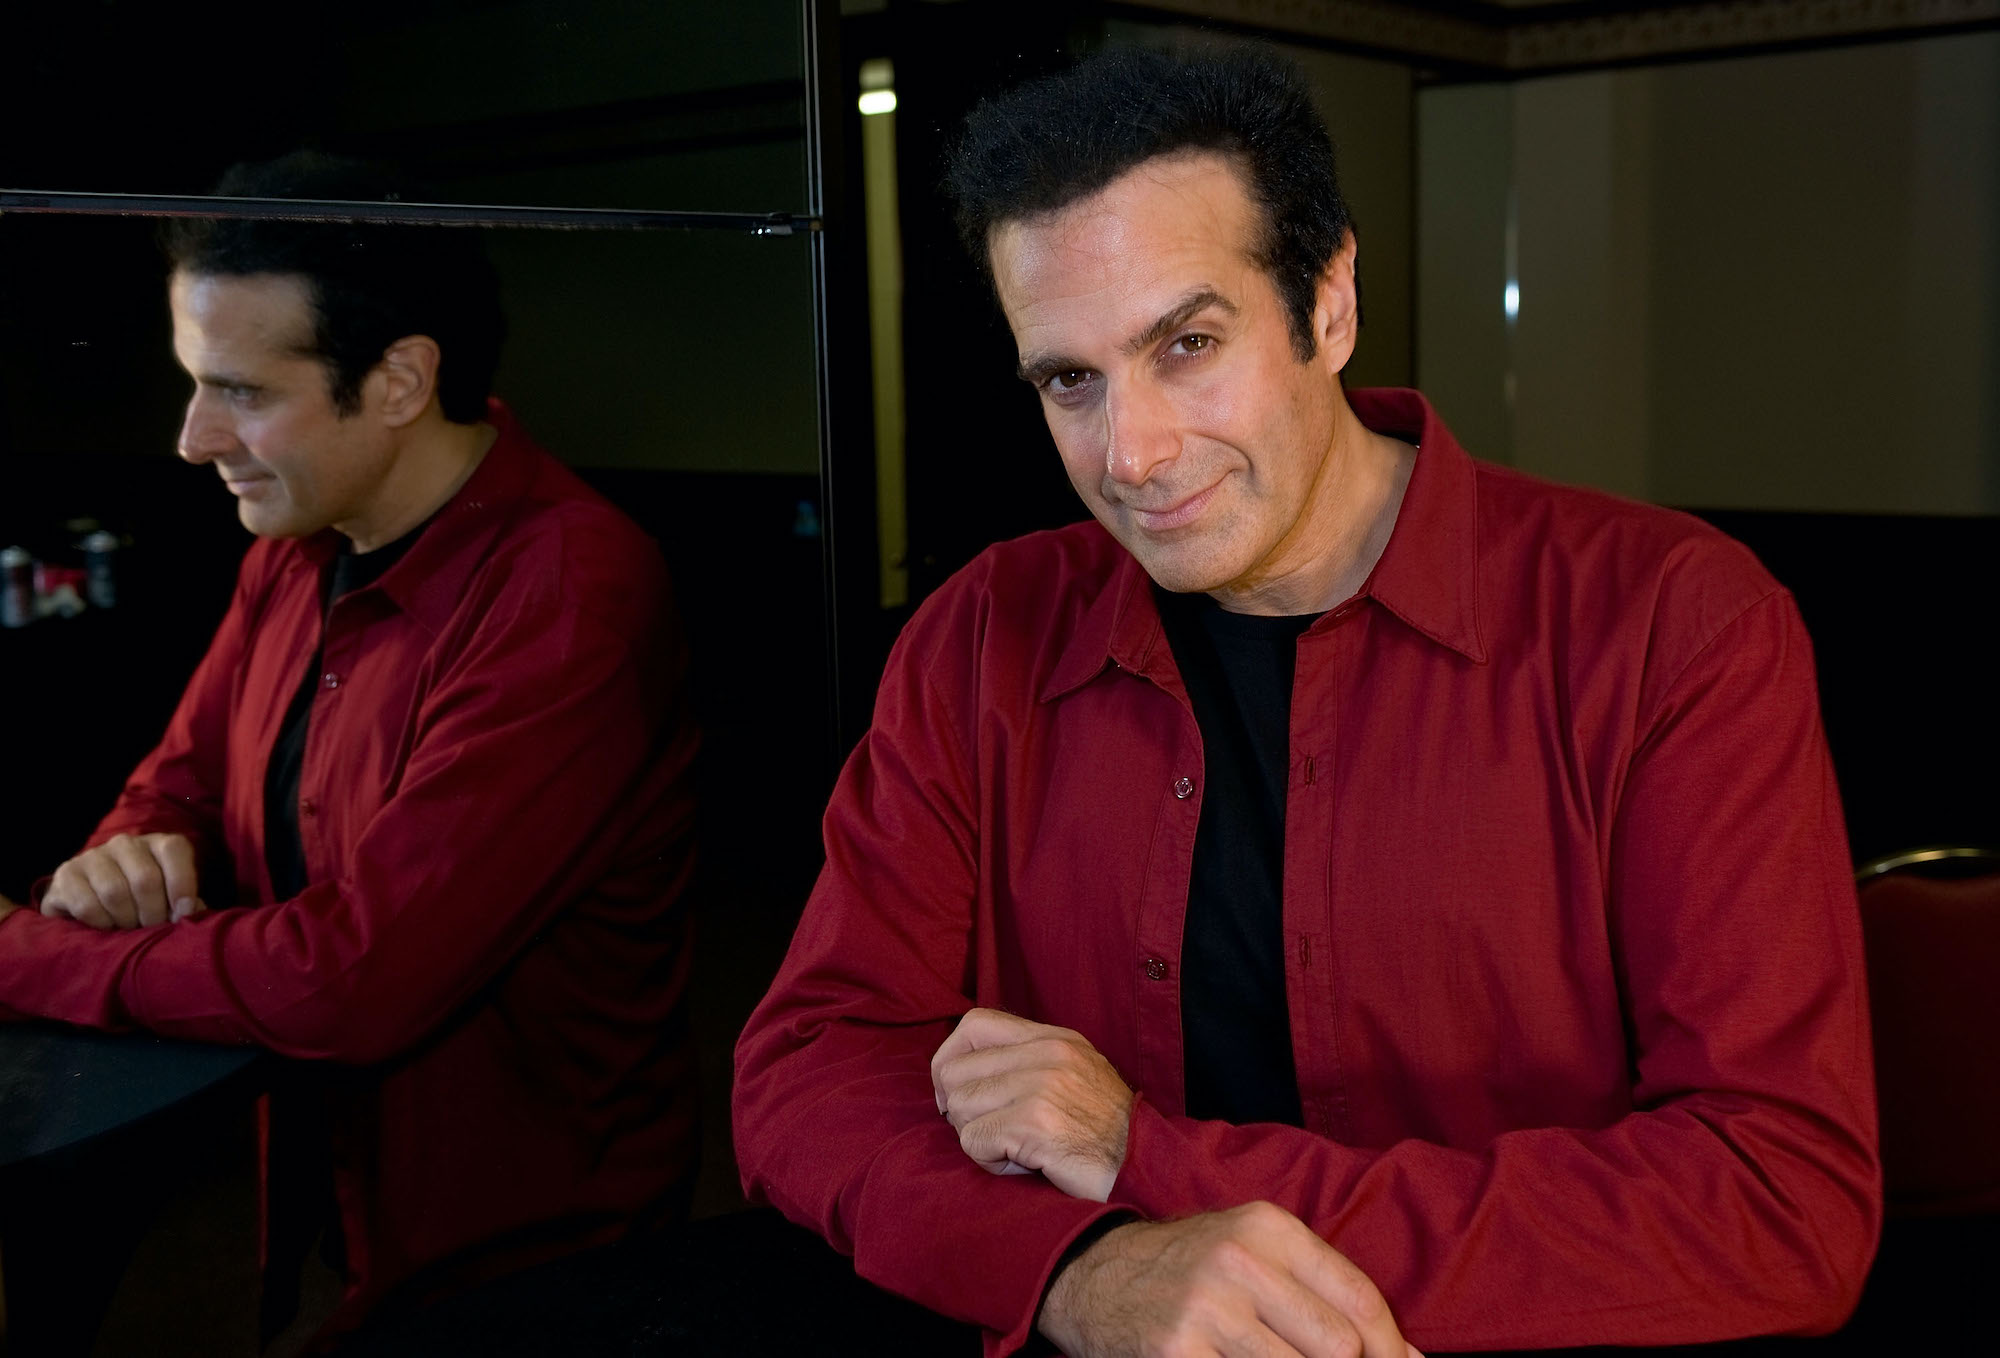 David Copperfield smiling at the camera to the right of a mirror